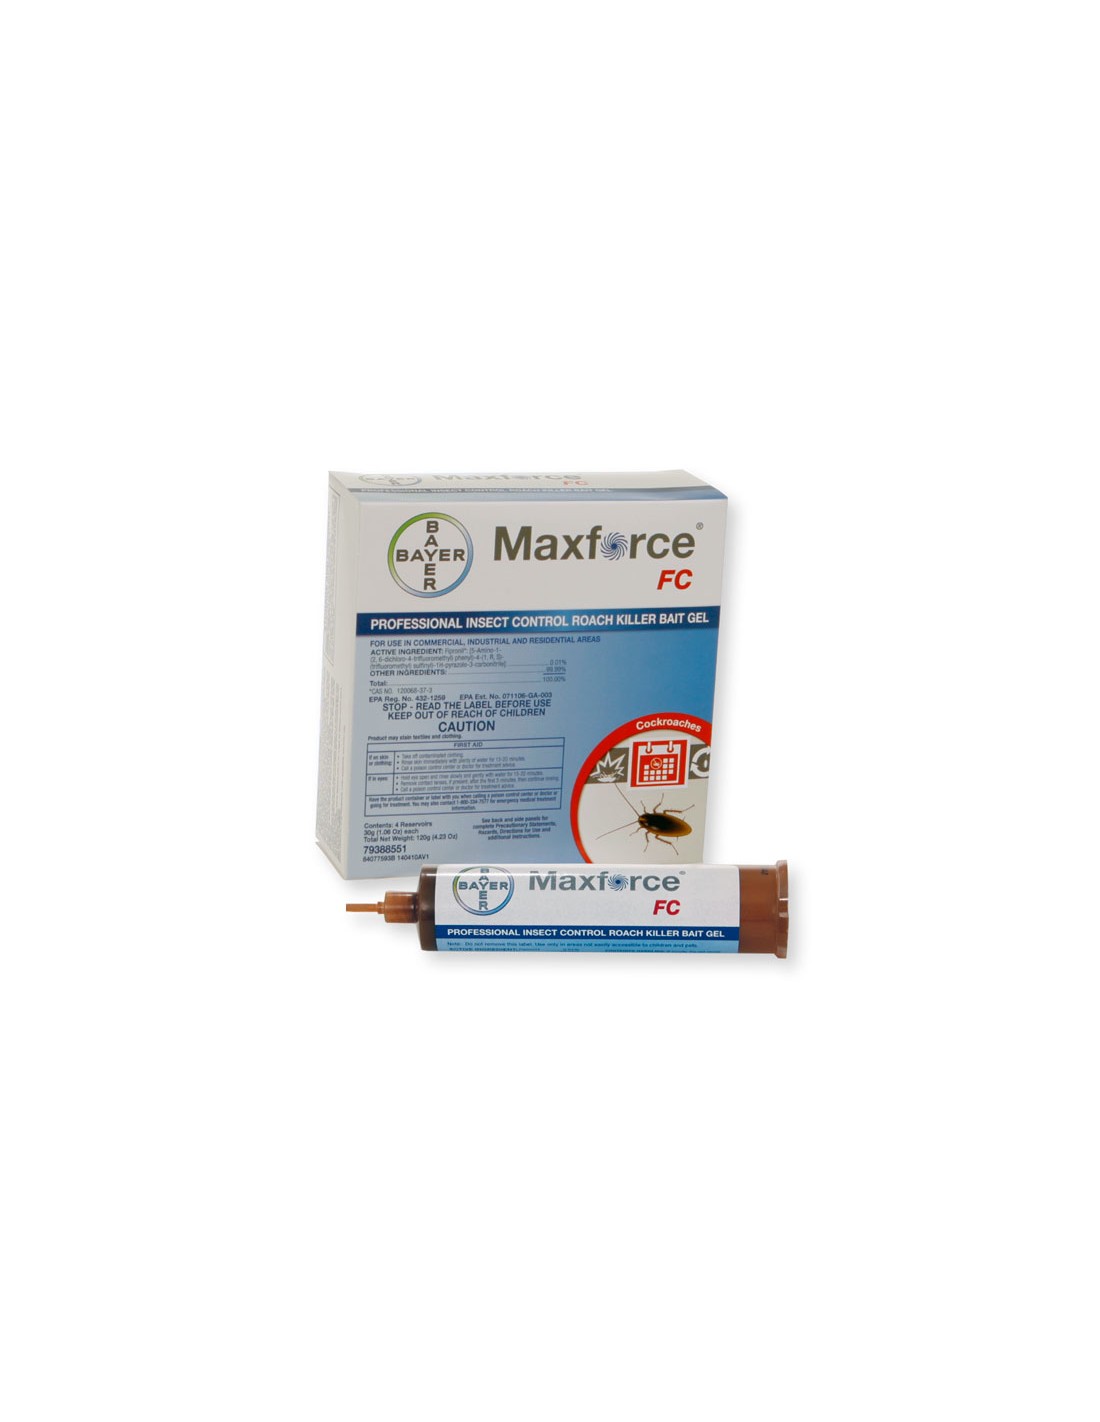 Will Maxforce FC Select 30 Gram Roach Killer Gel get rid of ants? I purchased it previously from you for roaches.